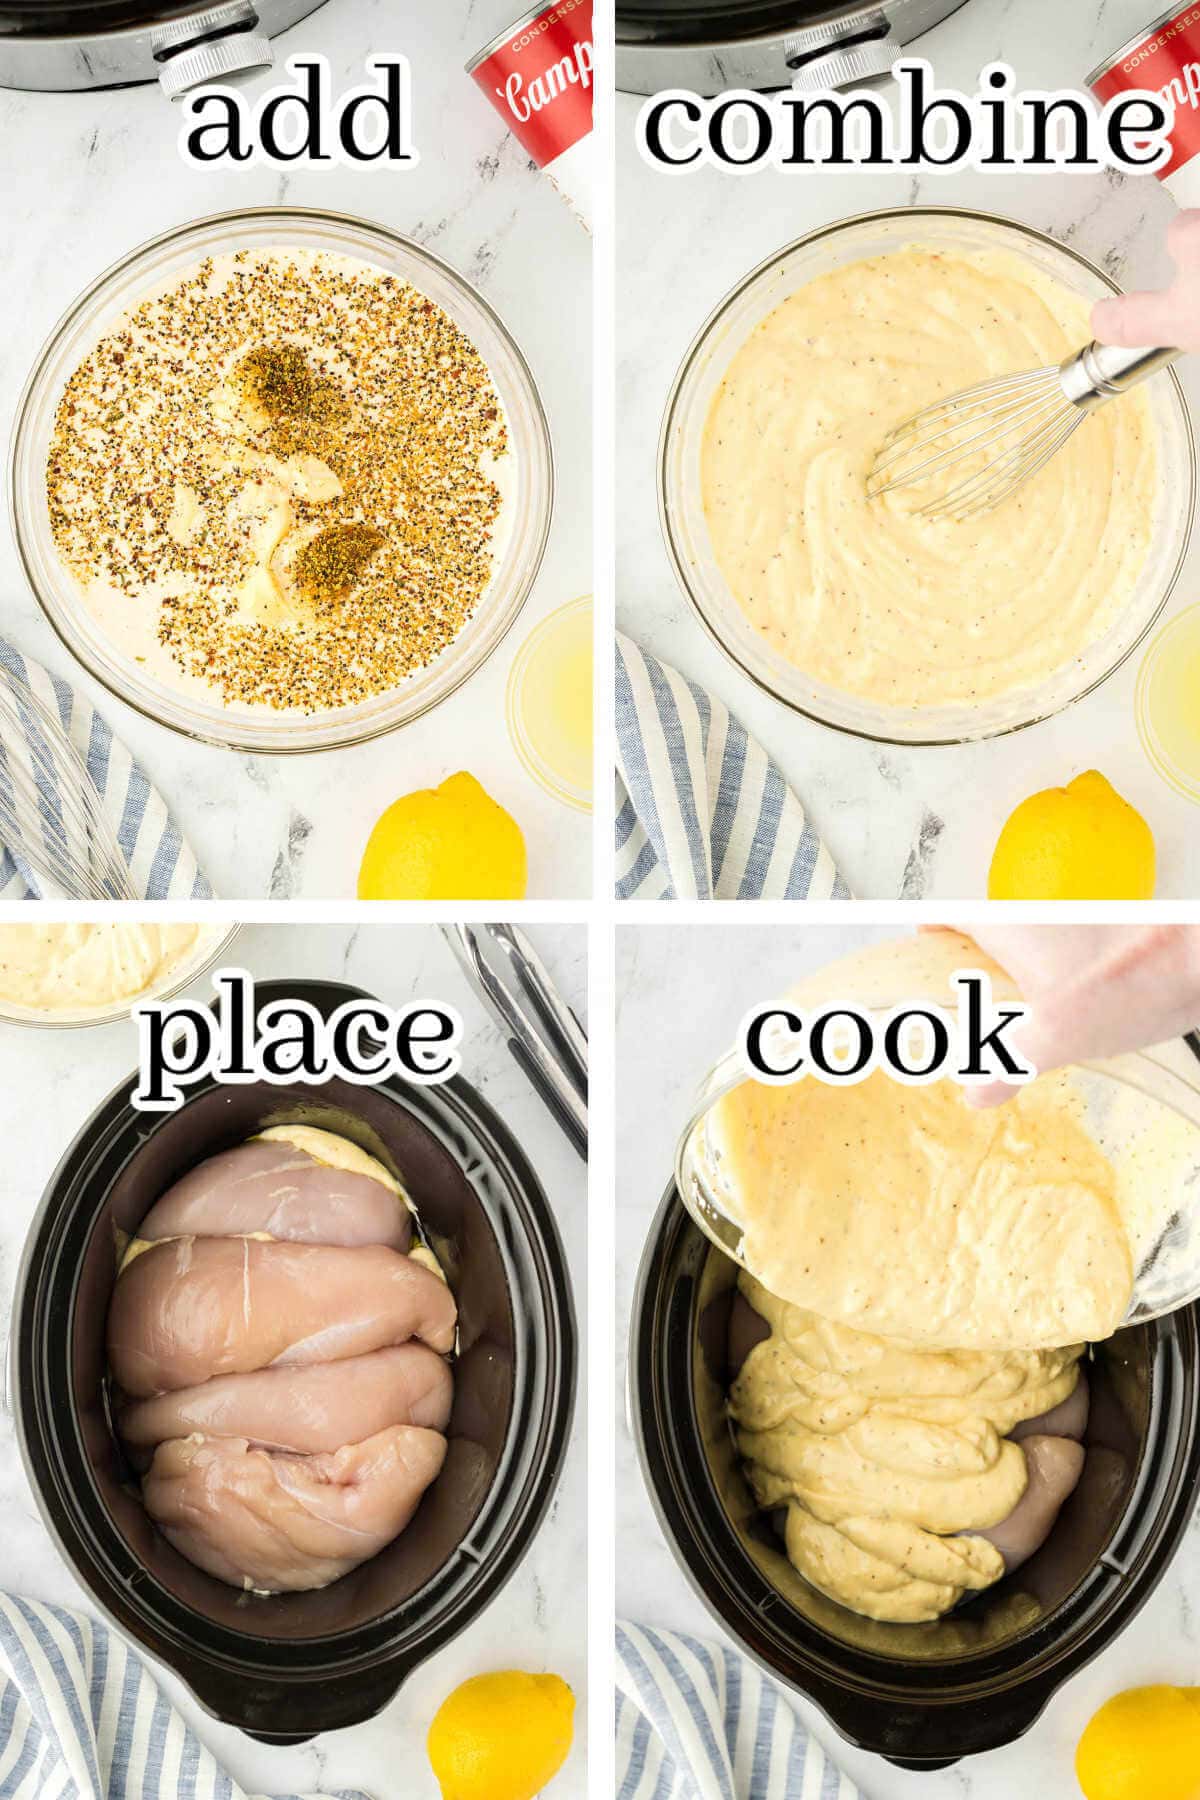 Photos with step-by-step instructions to make the recipe, with print overlay.